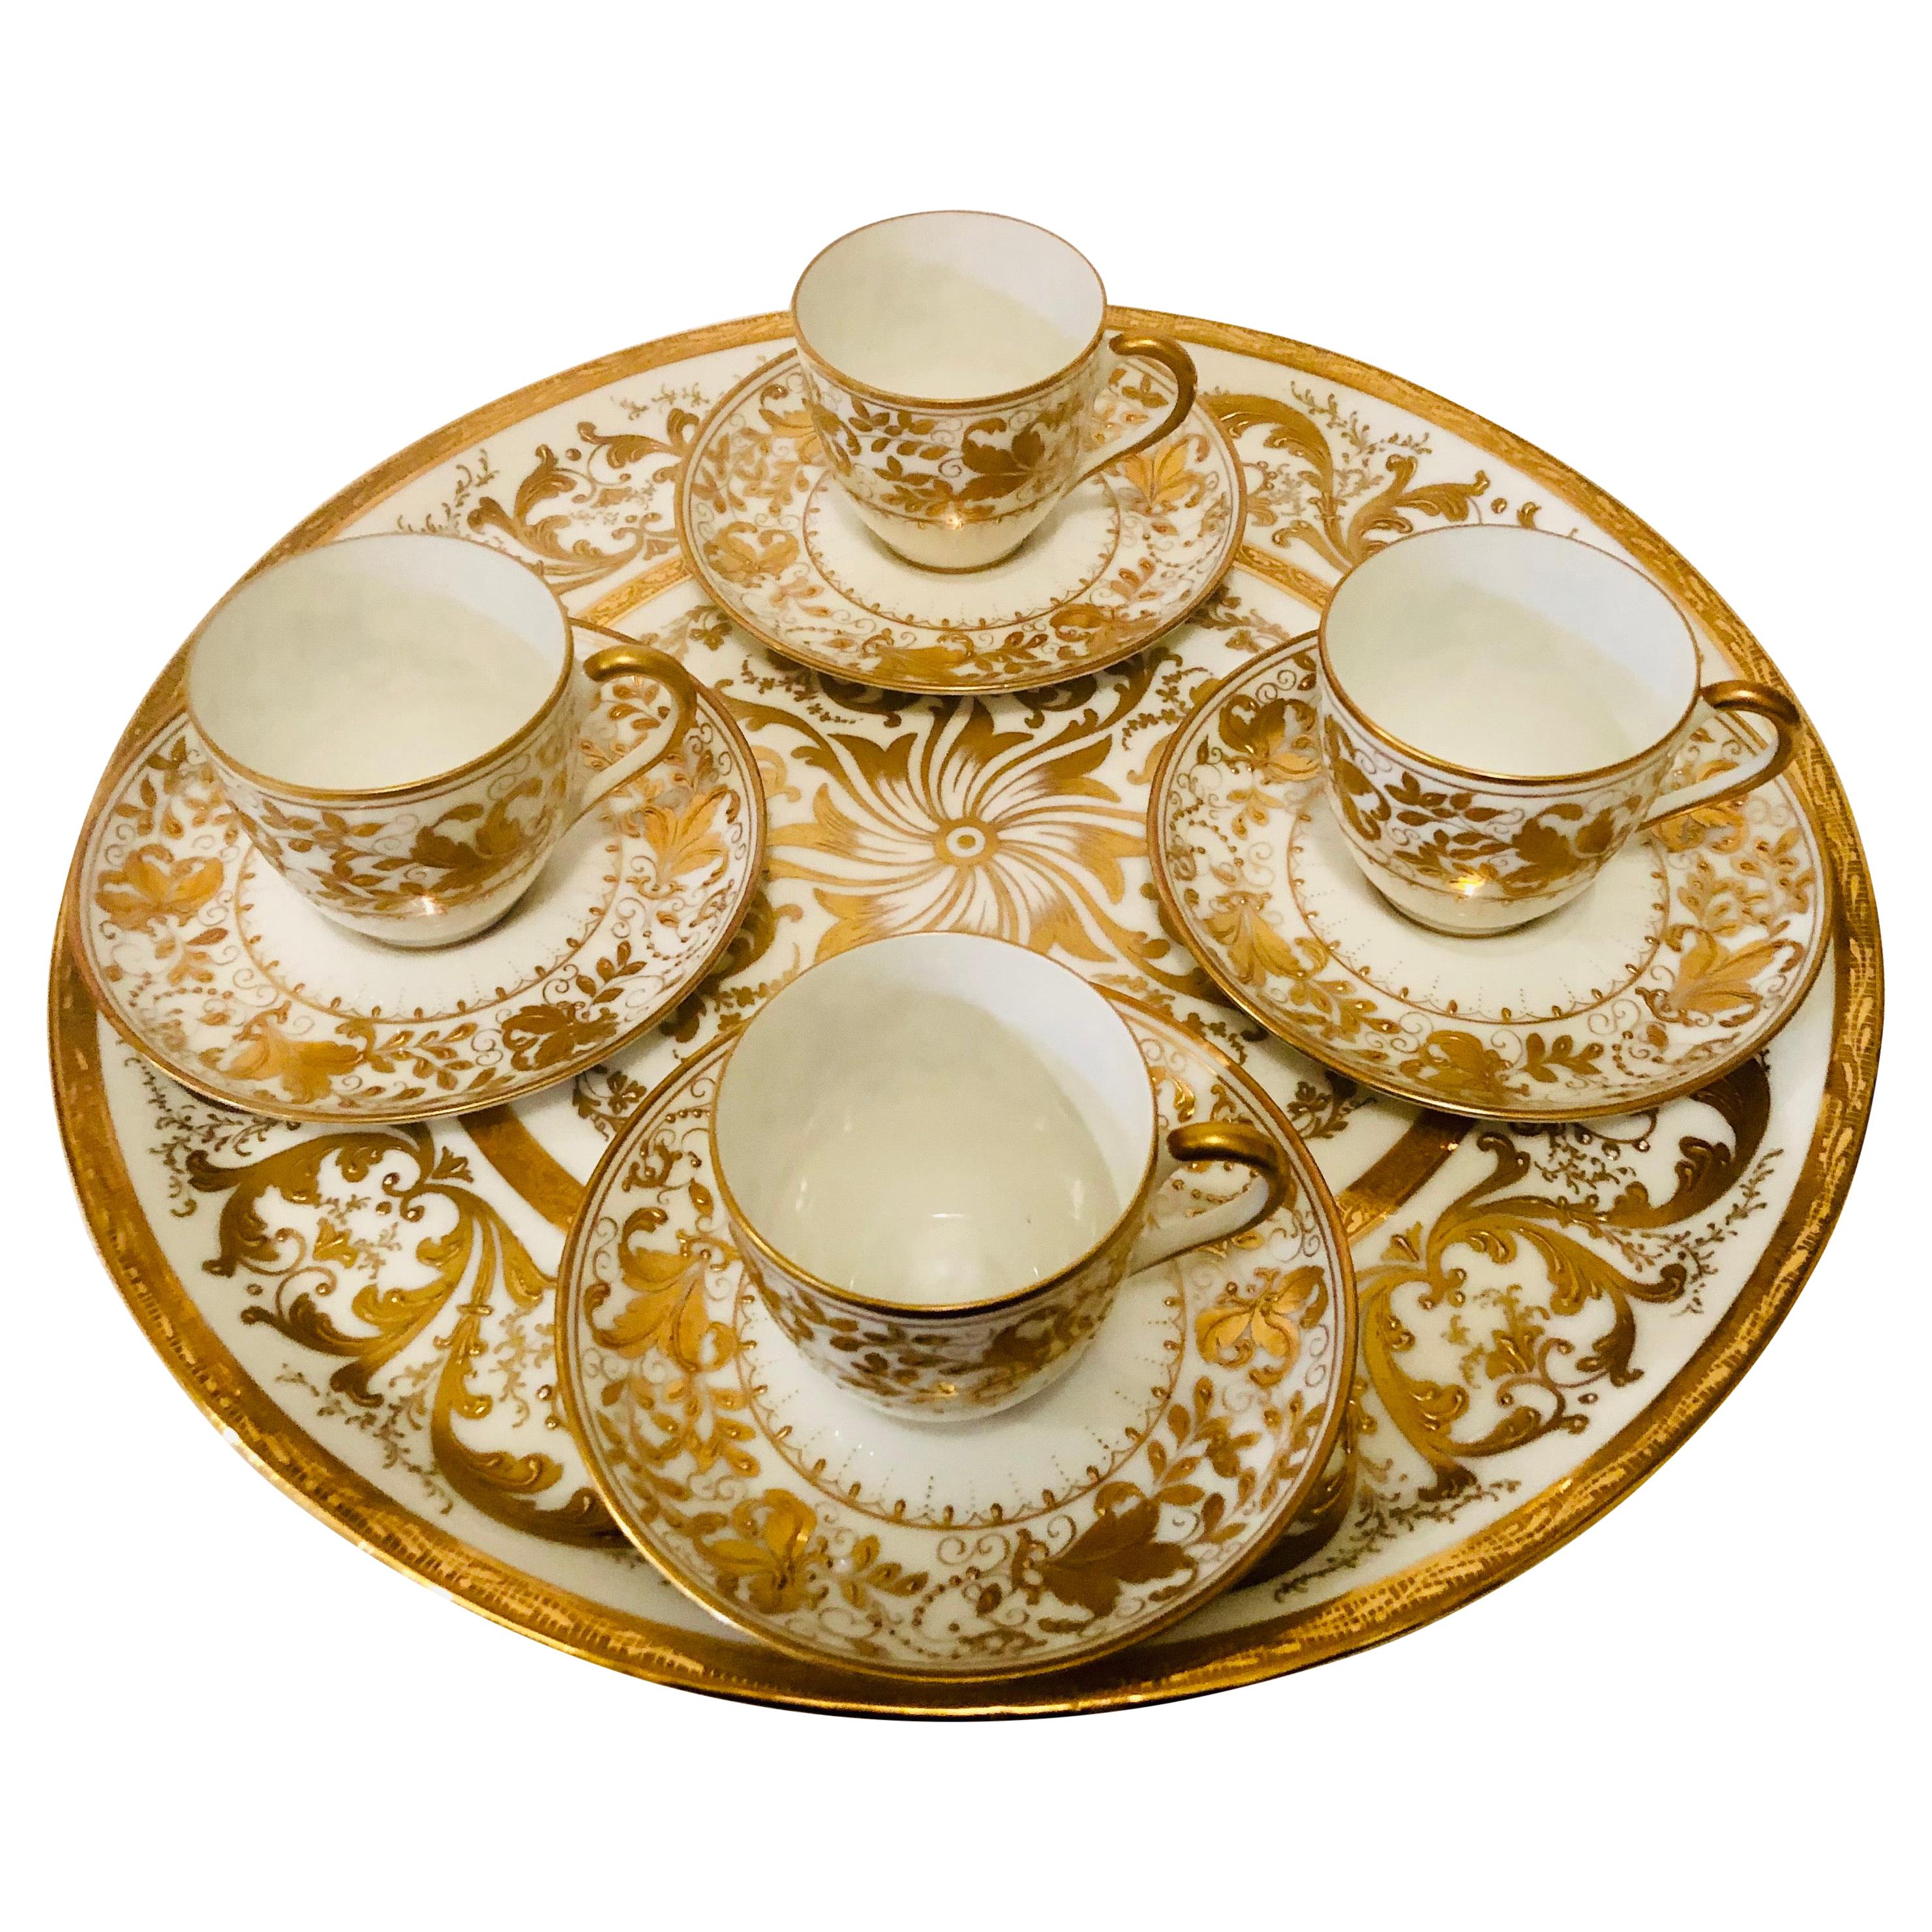 Le Tallec Set of 4 Demitasse Cups and Matching Tray with Profuse Raised Gilding For Sale